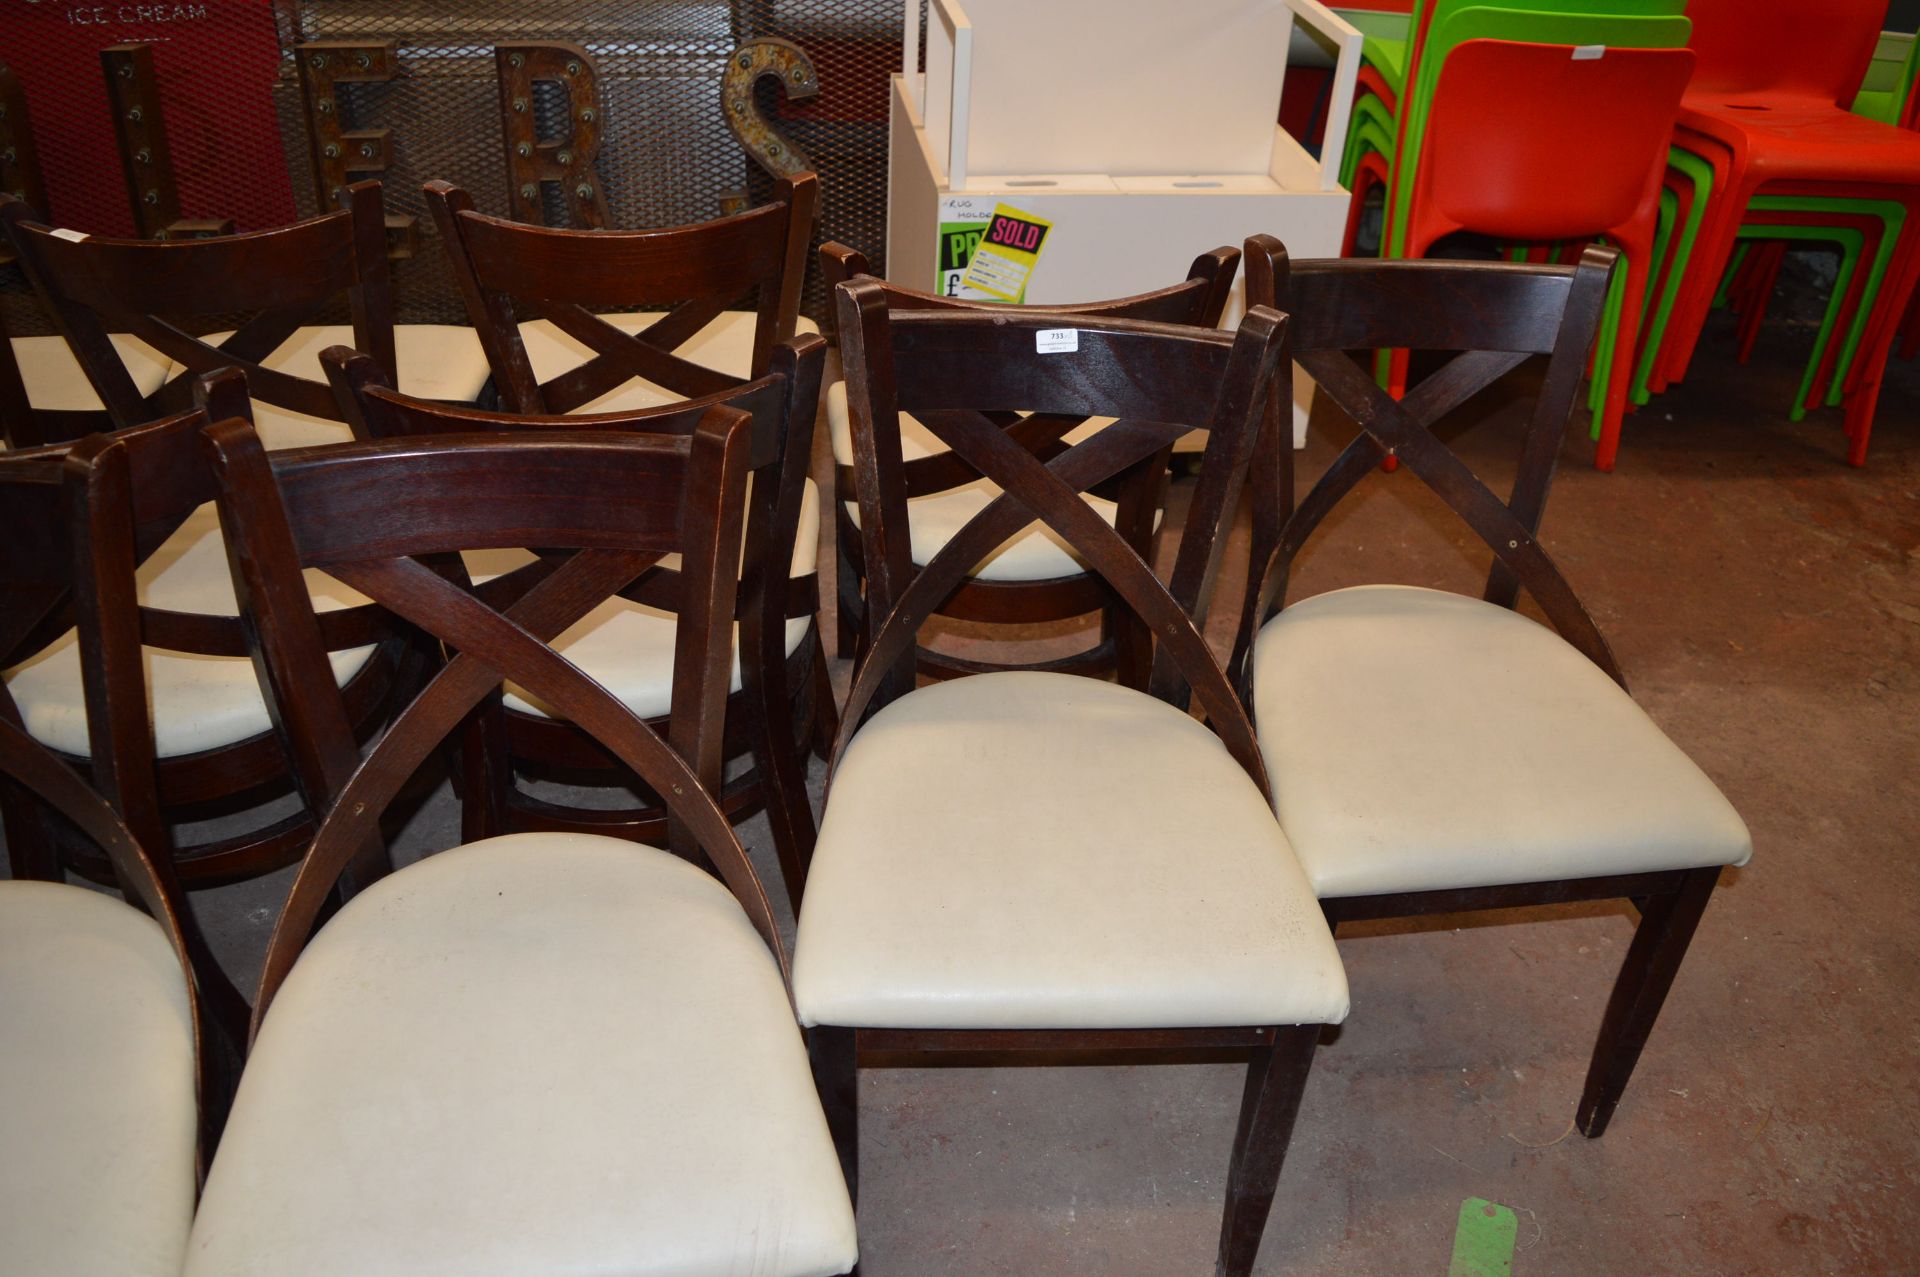 *Five Brown Chairs with Off-white Seats Plus One with Faults